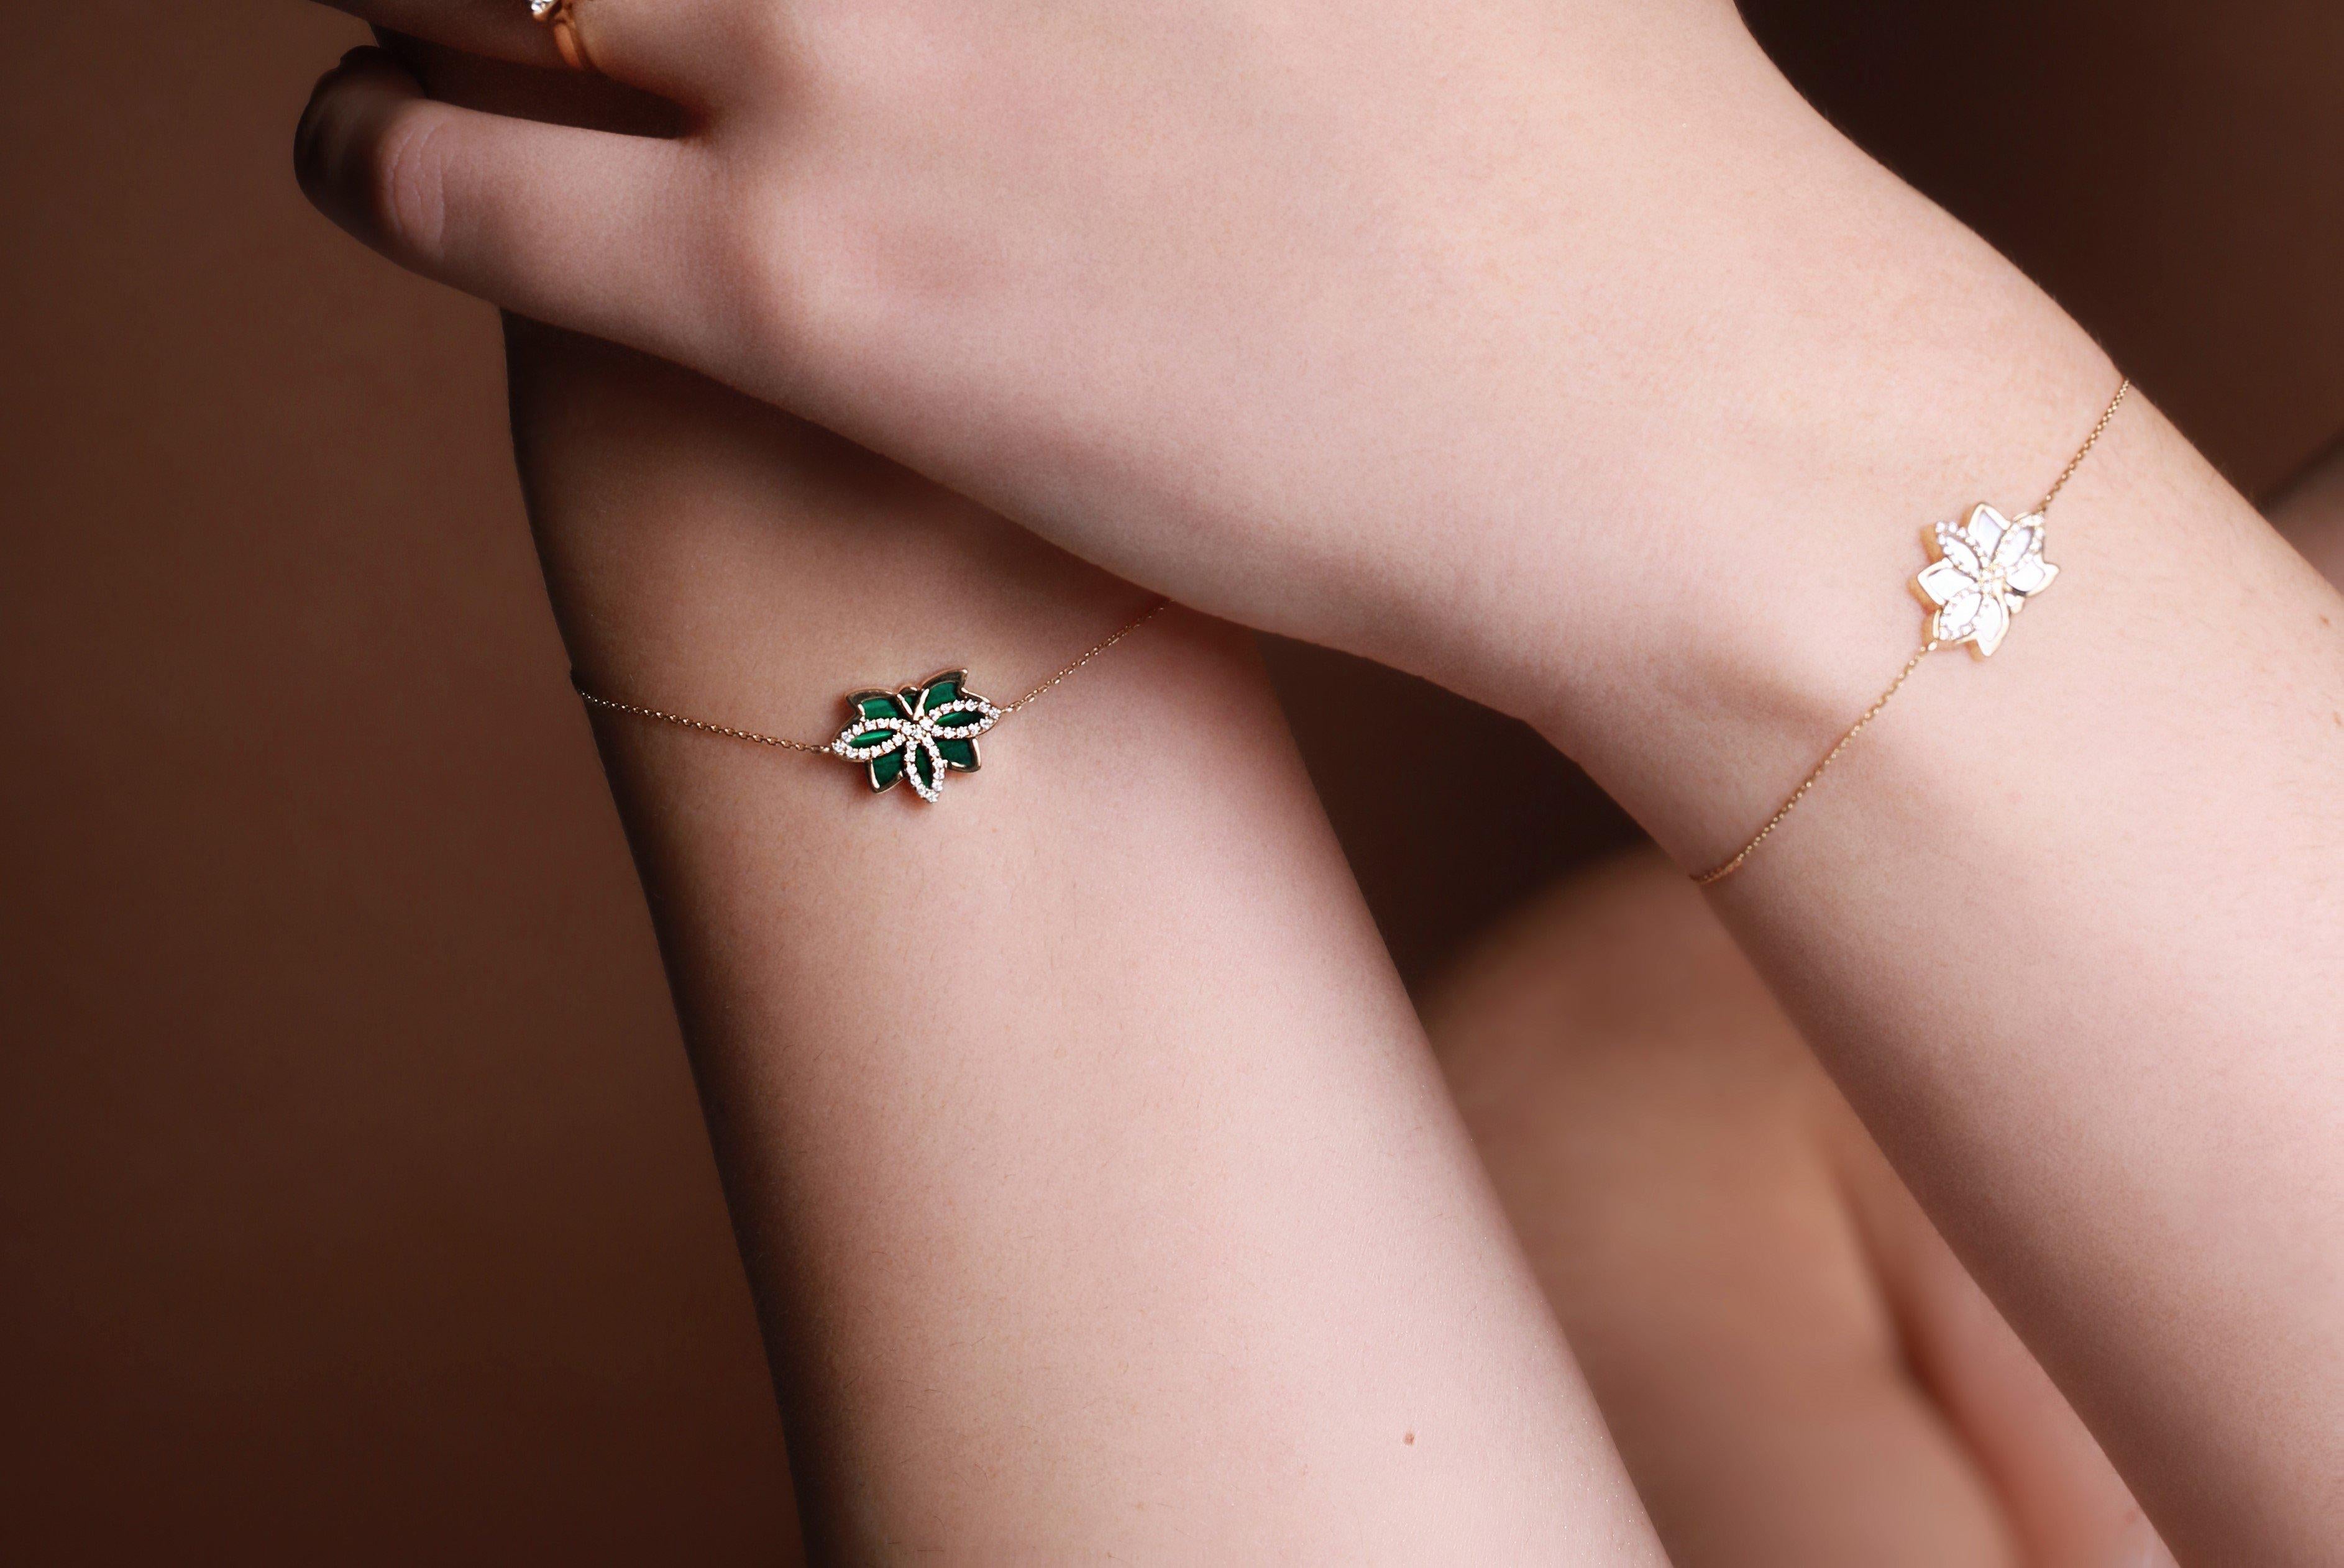 Our Nelumbo Malachite bracelet combines both strength and elegance to create a luxurious piece that will go perfectly with any outfit you put on! The bracelet drapes gracefully around your wrist without adding too much weight.

Made from 18k gold,